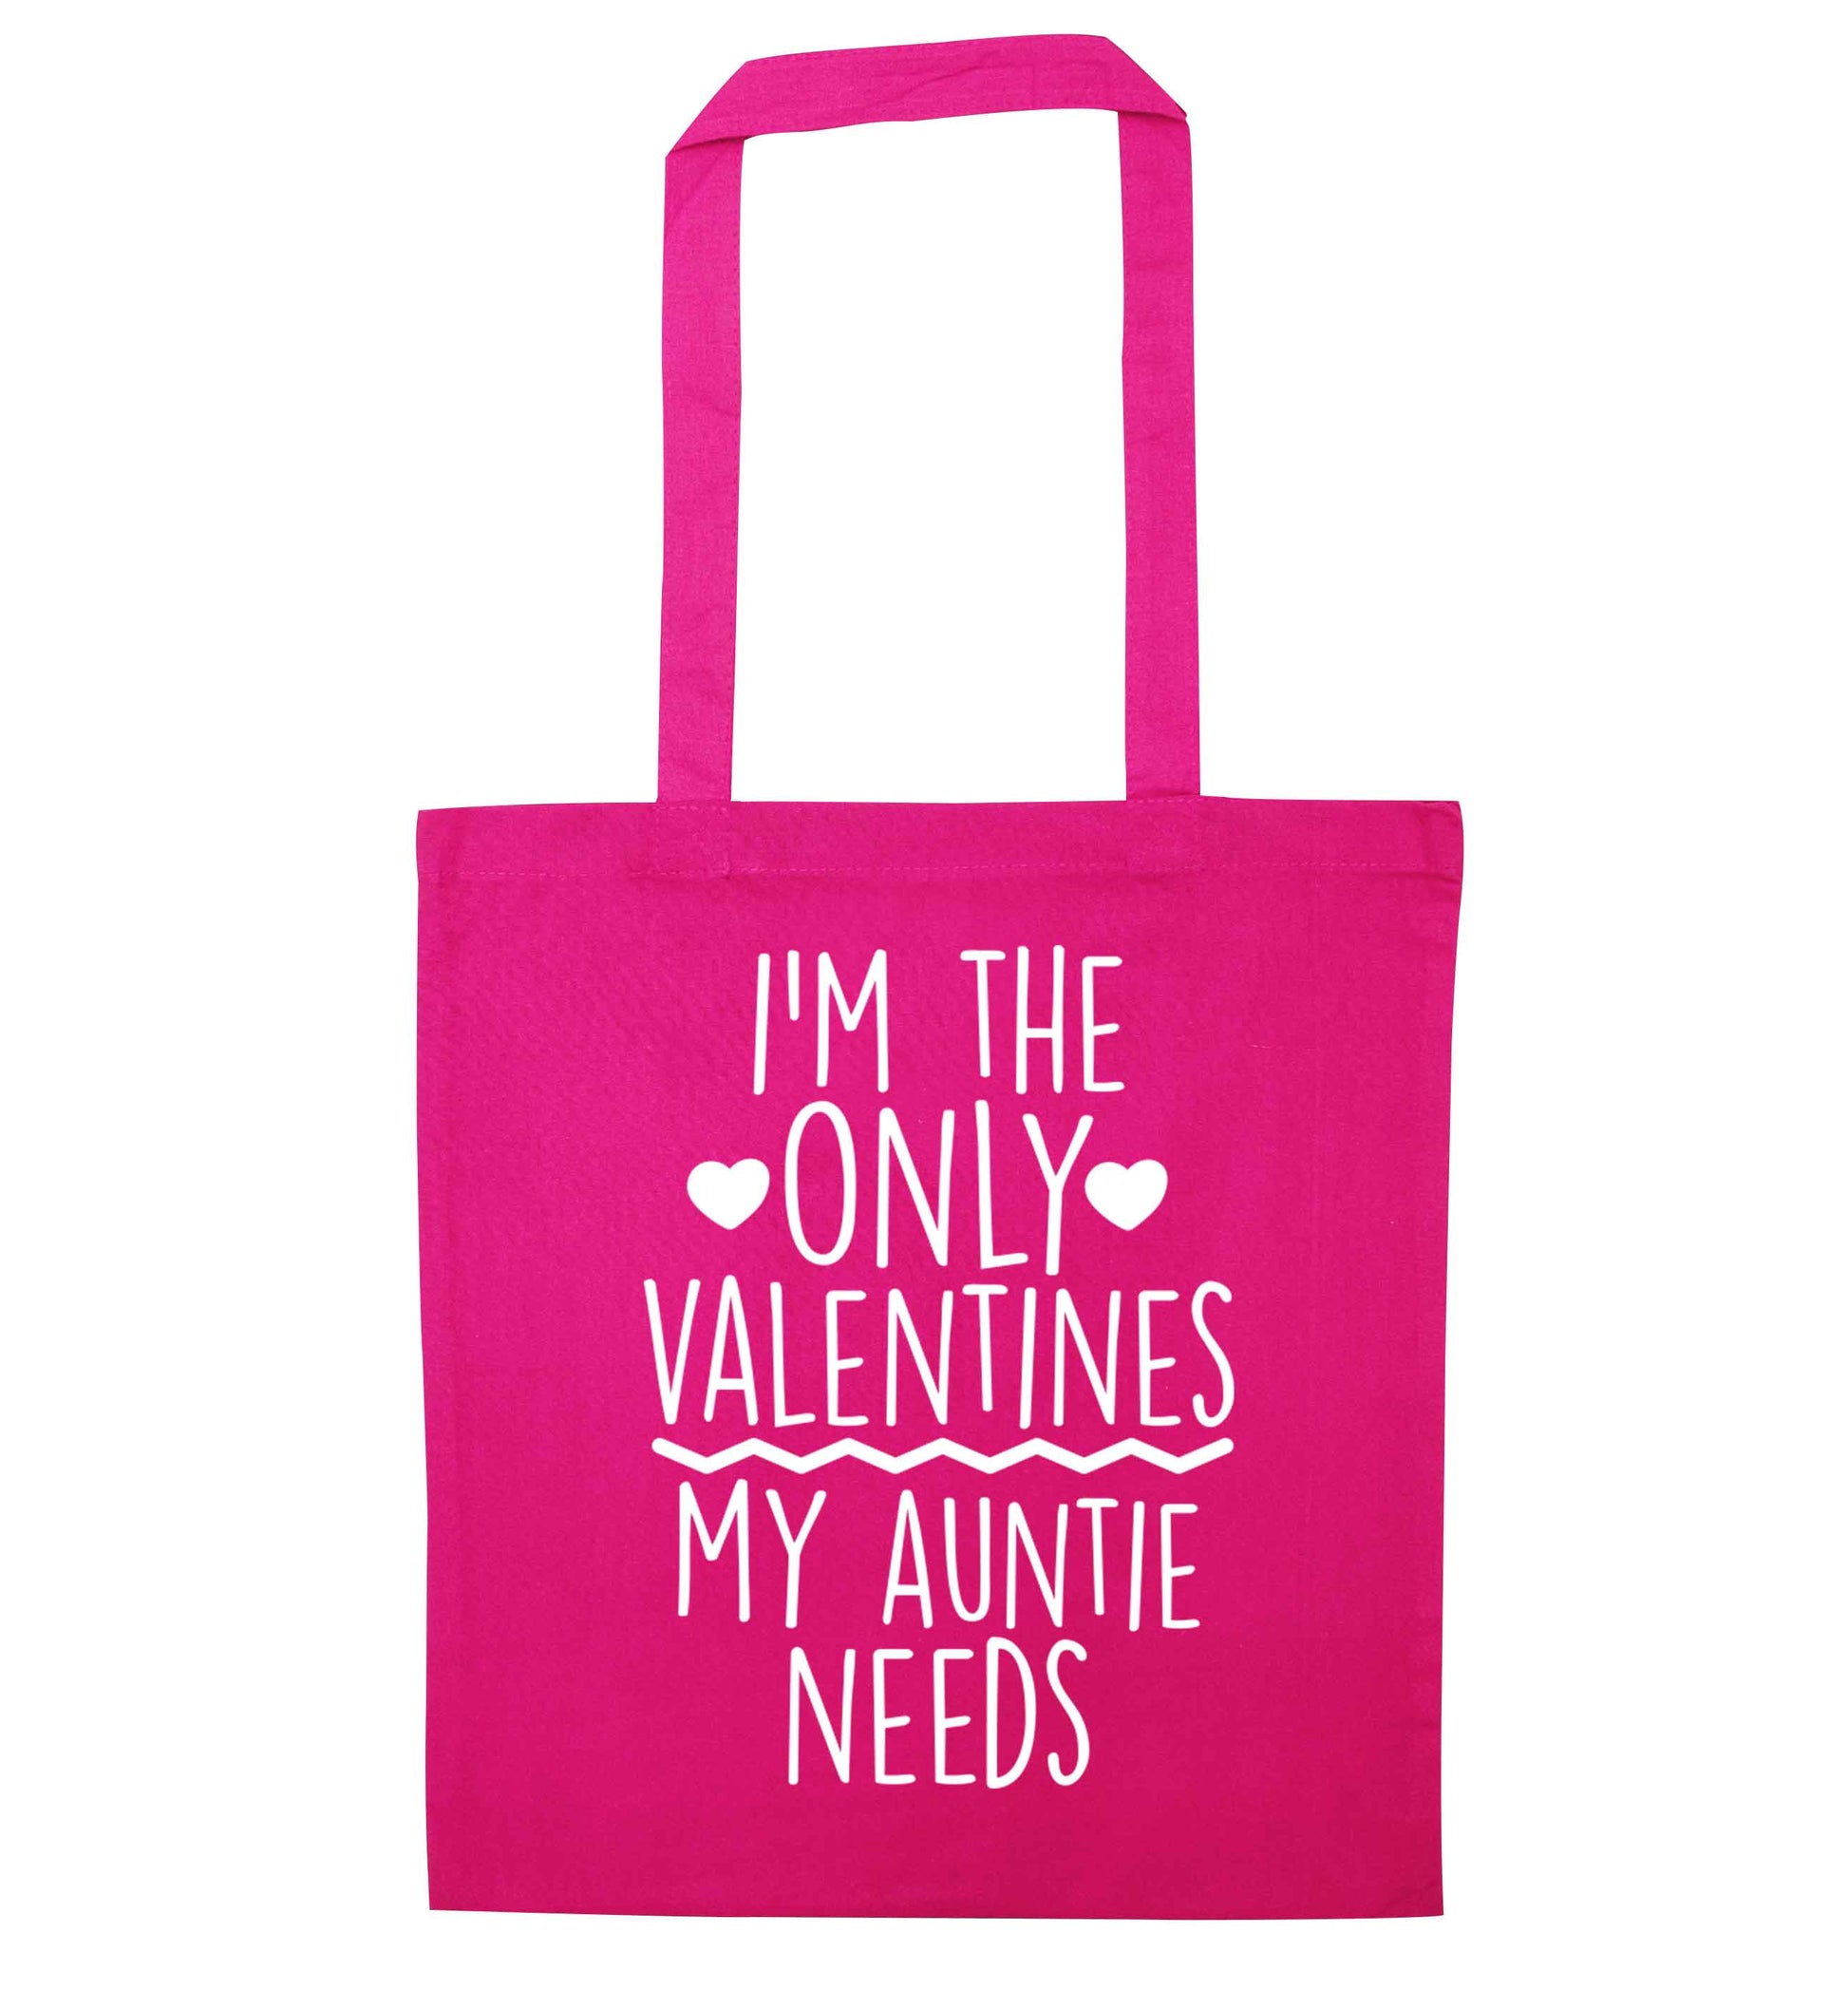 I'm the only valentines my auntie needs pink tote bag